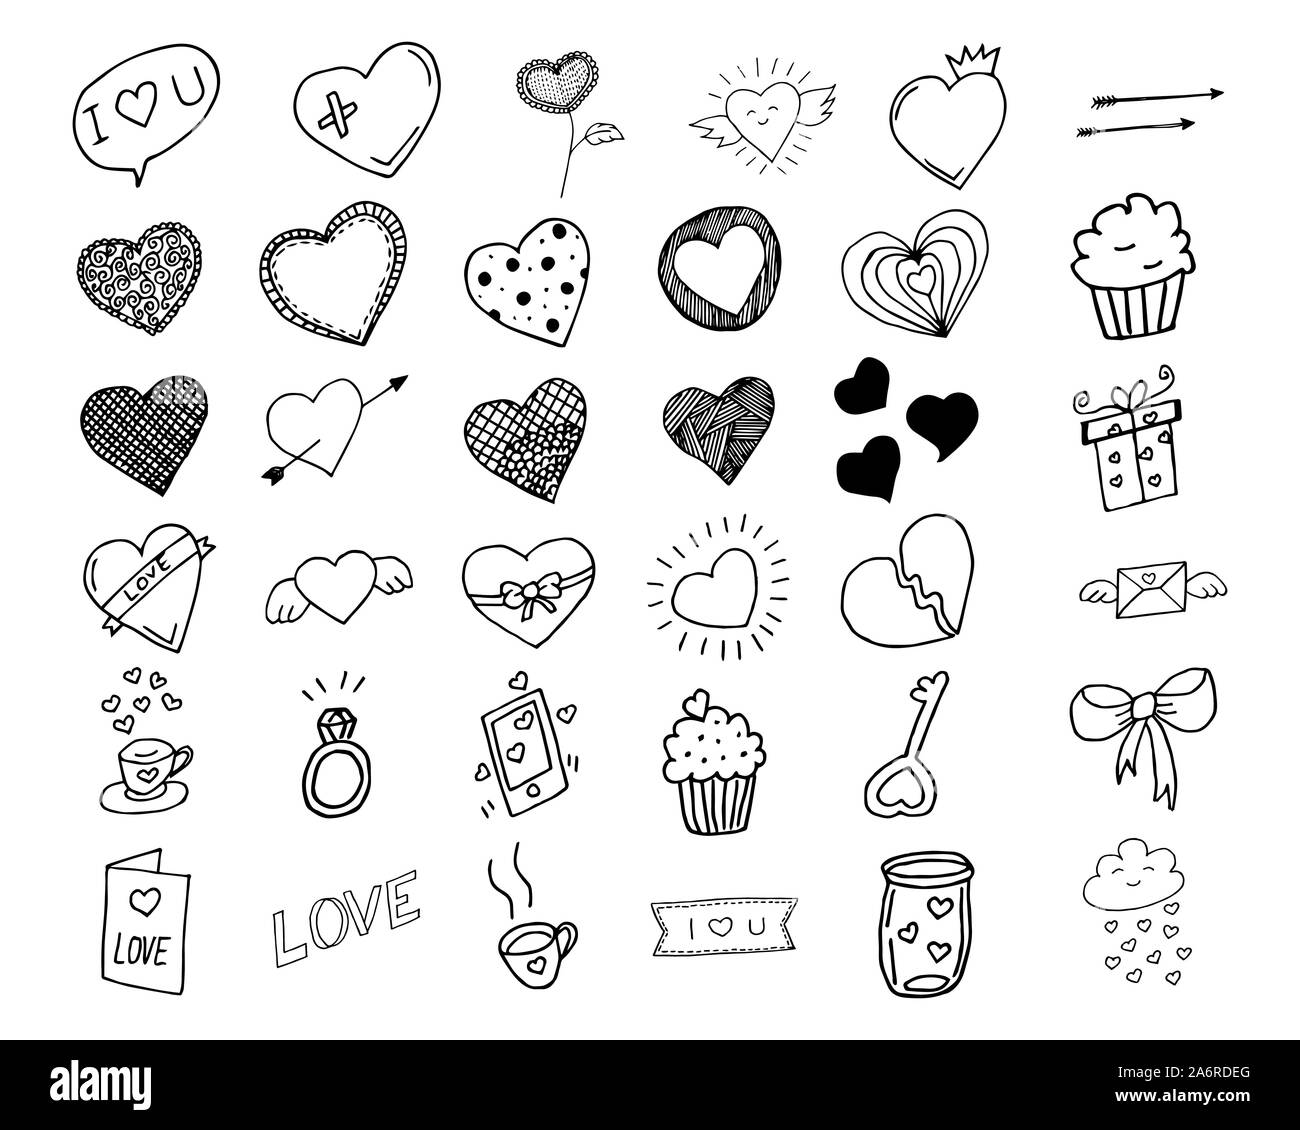 Hand drawn hearts doodle design elements, isolated hearts collection ...